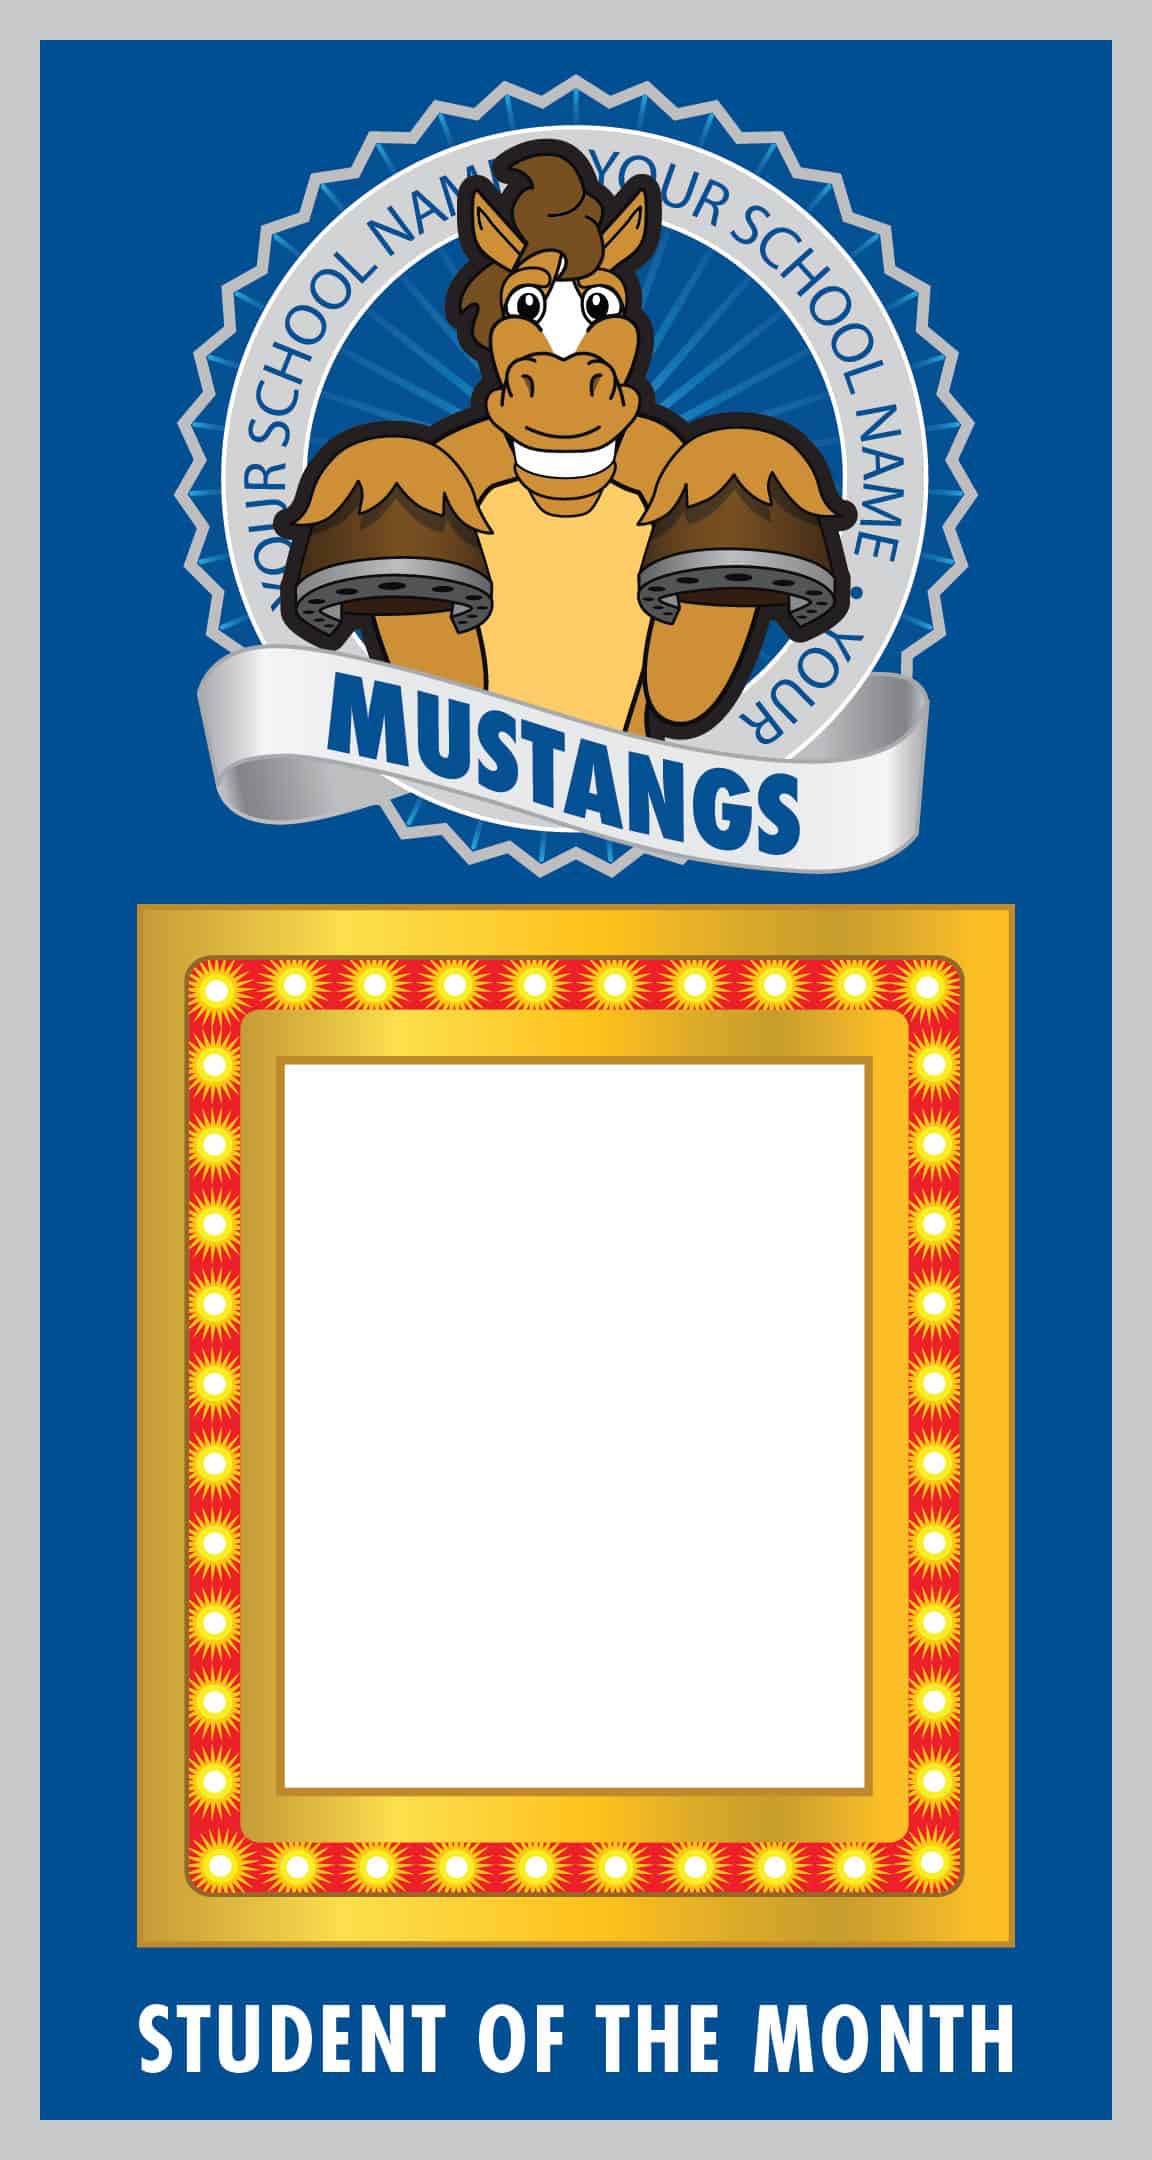 Photo-Marquee-Mustang